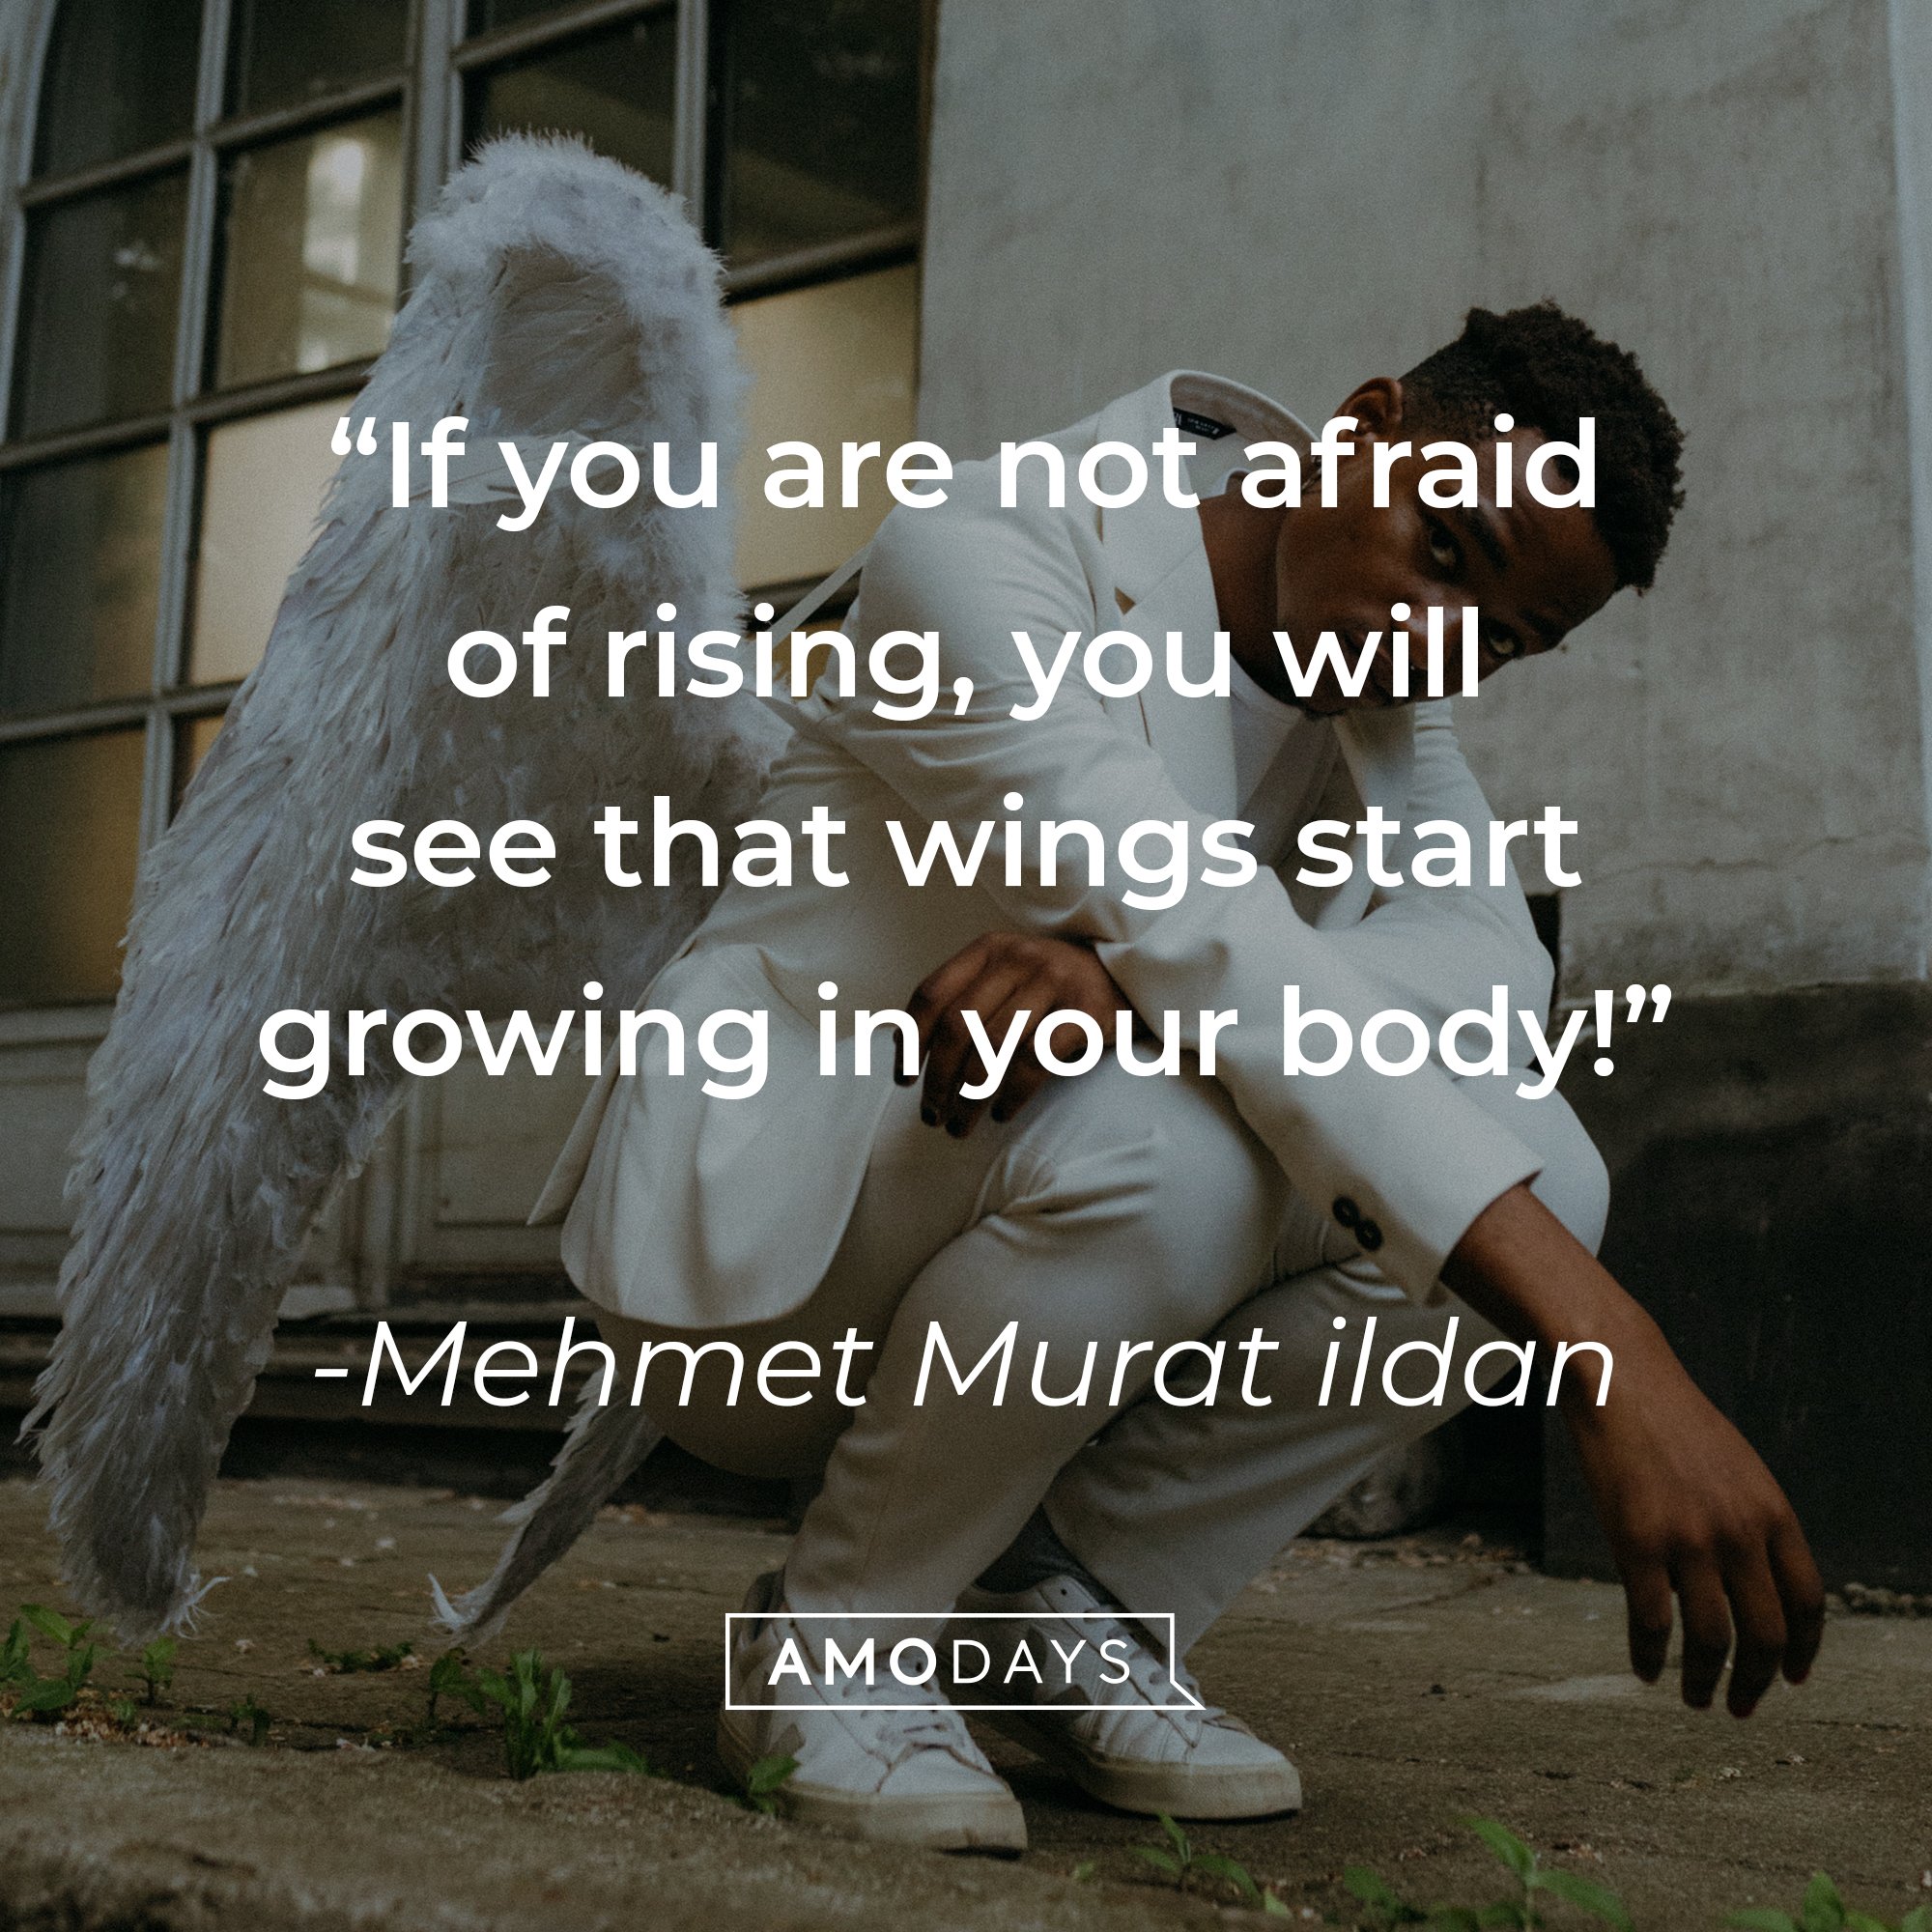 Mehmet Murat ildan's quote: "If you are not afraid of rising, you will see that wings start growing in your body!" | Image: AmoDays